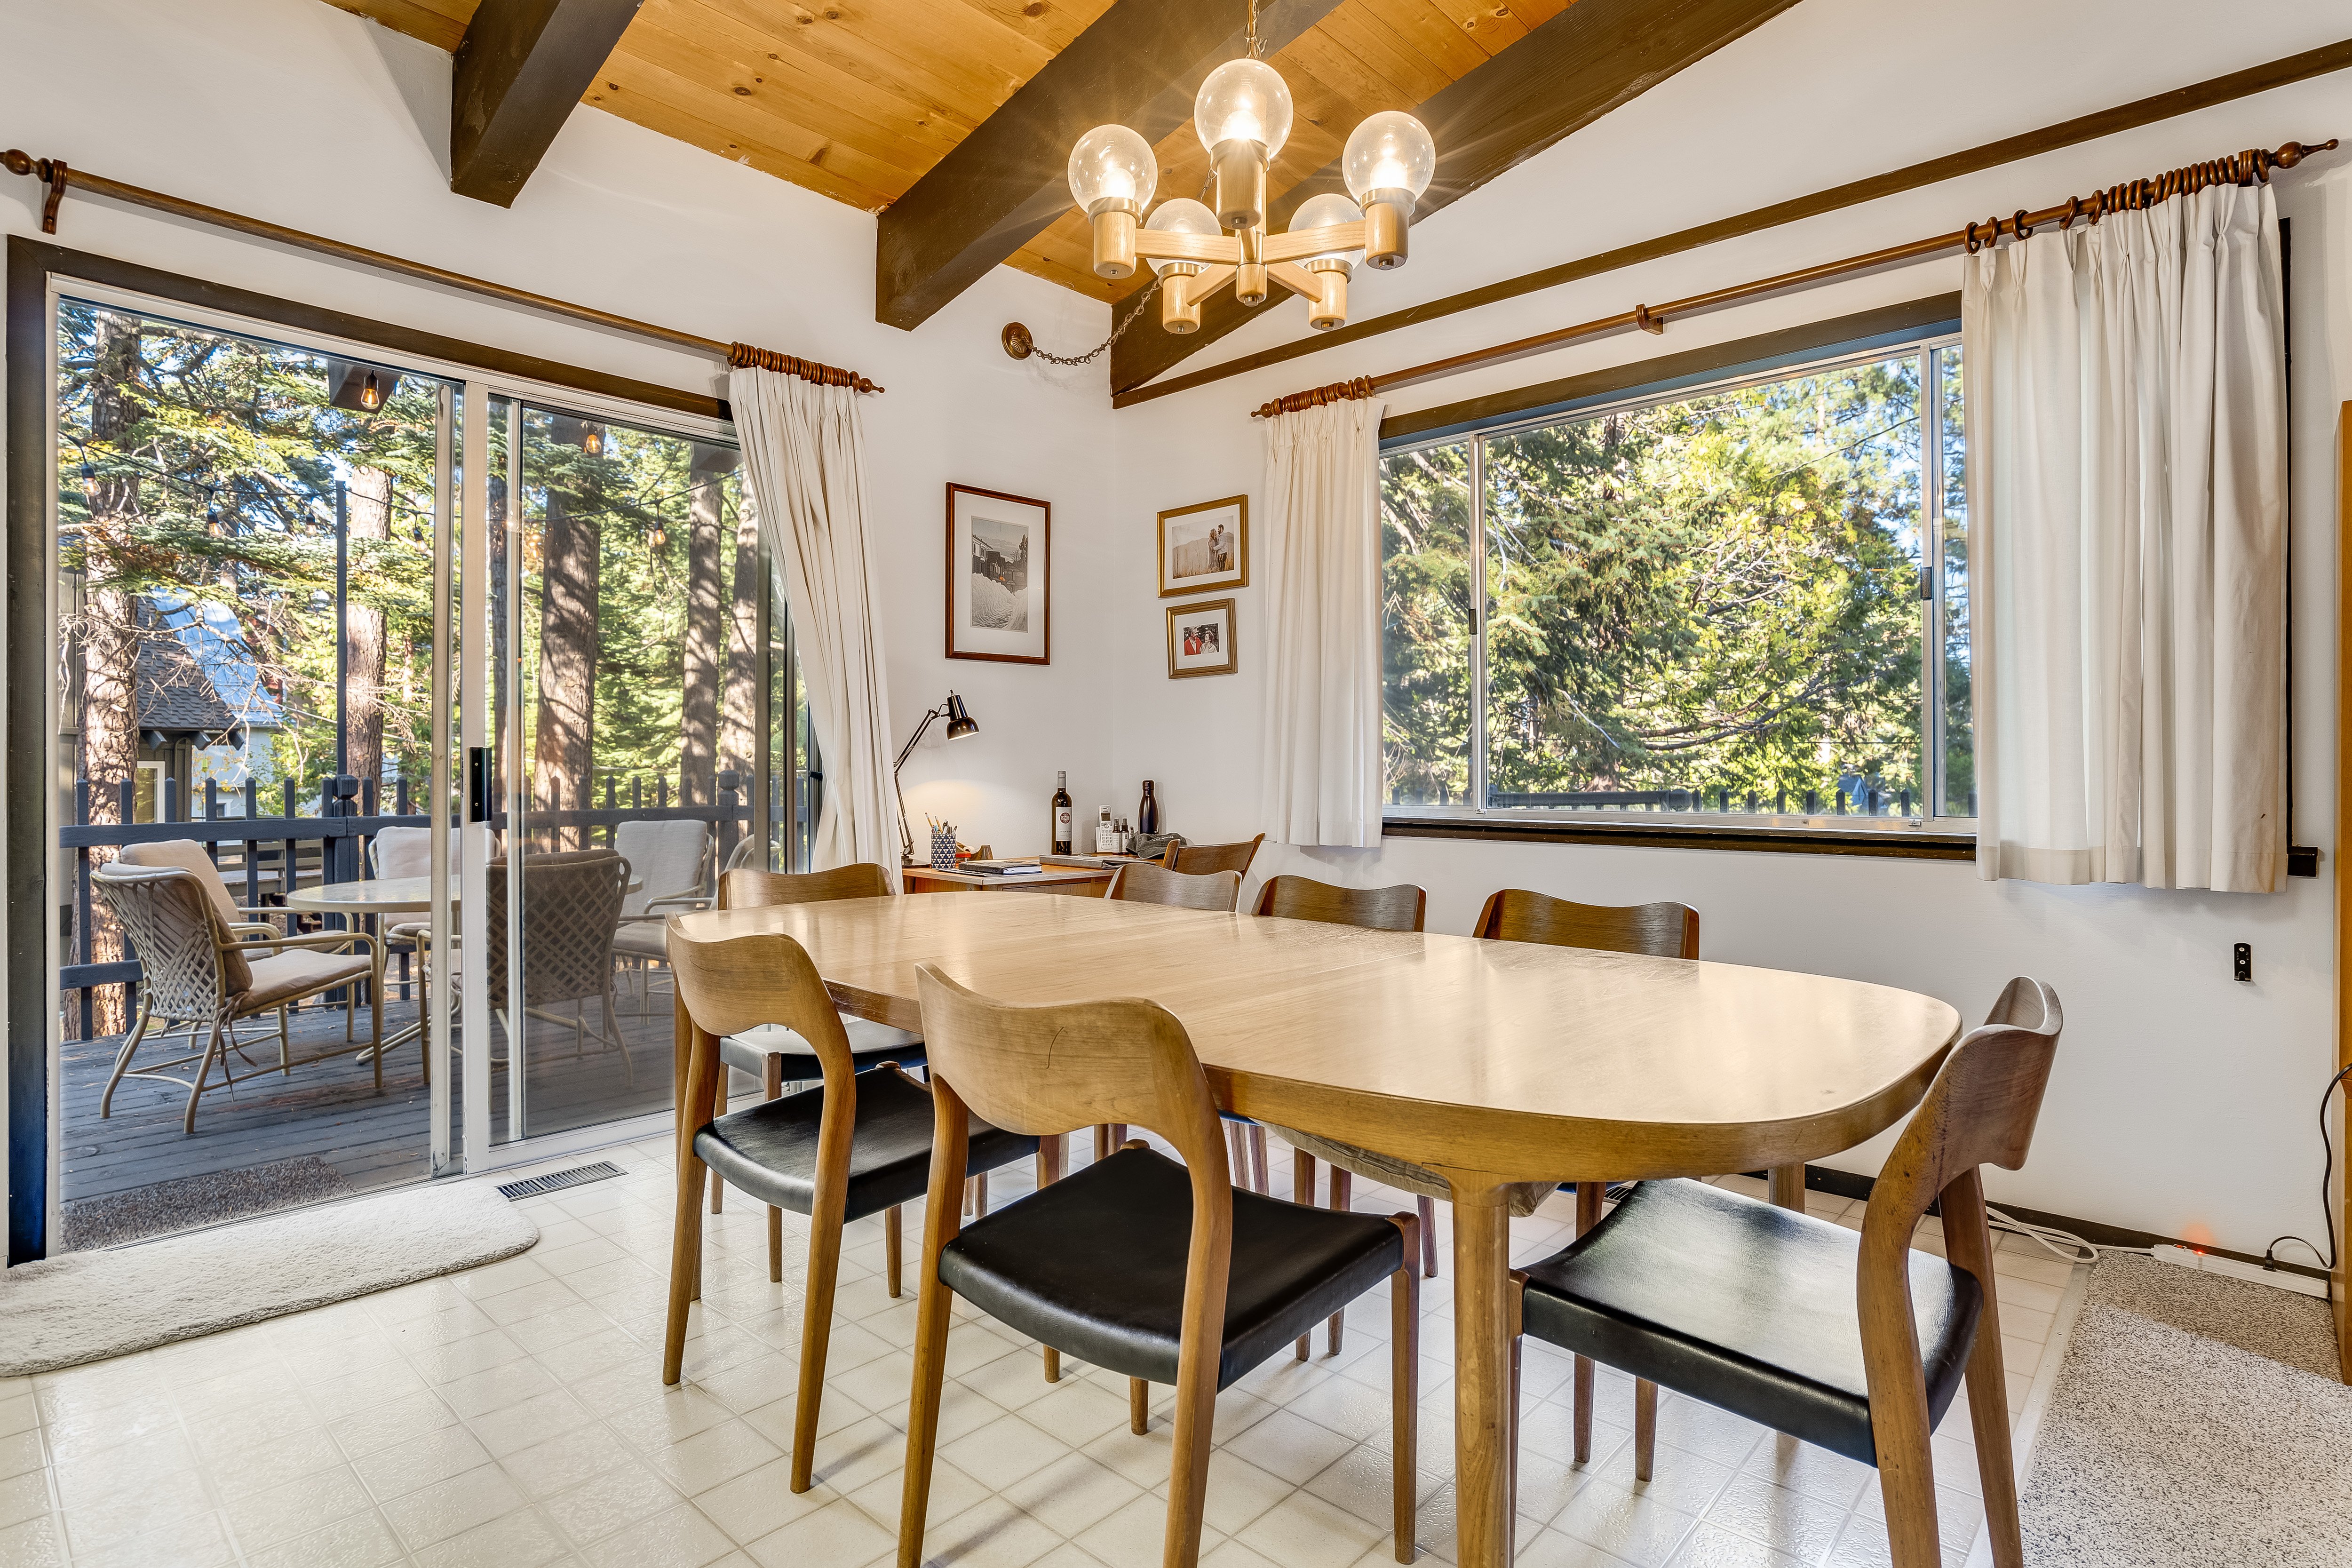 Bright dining area with treetop views.